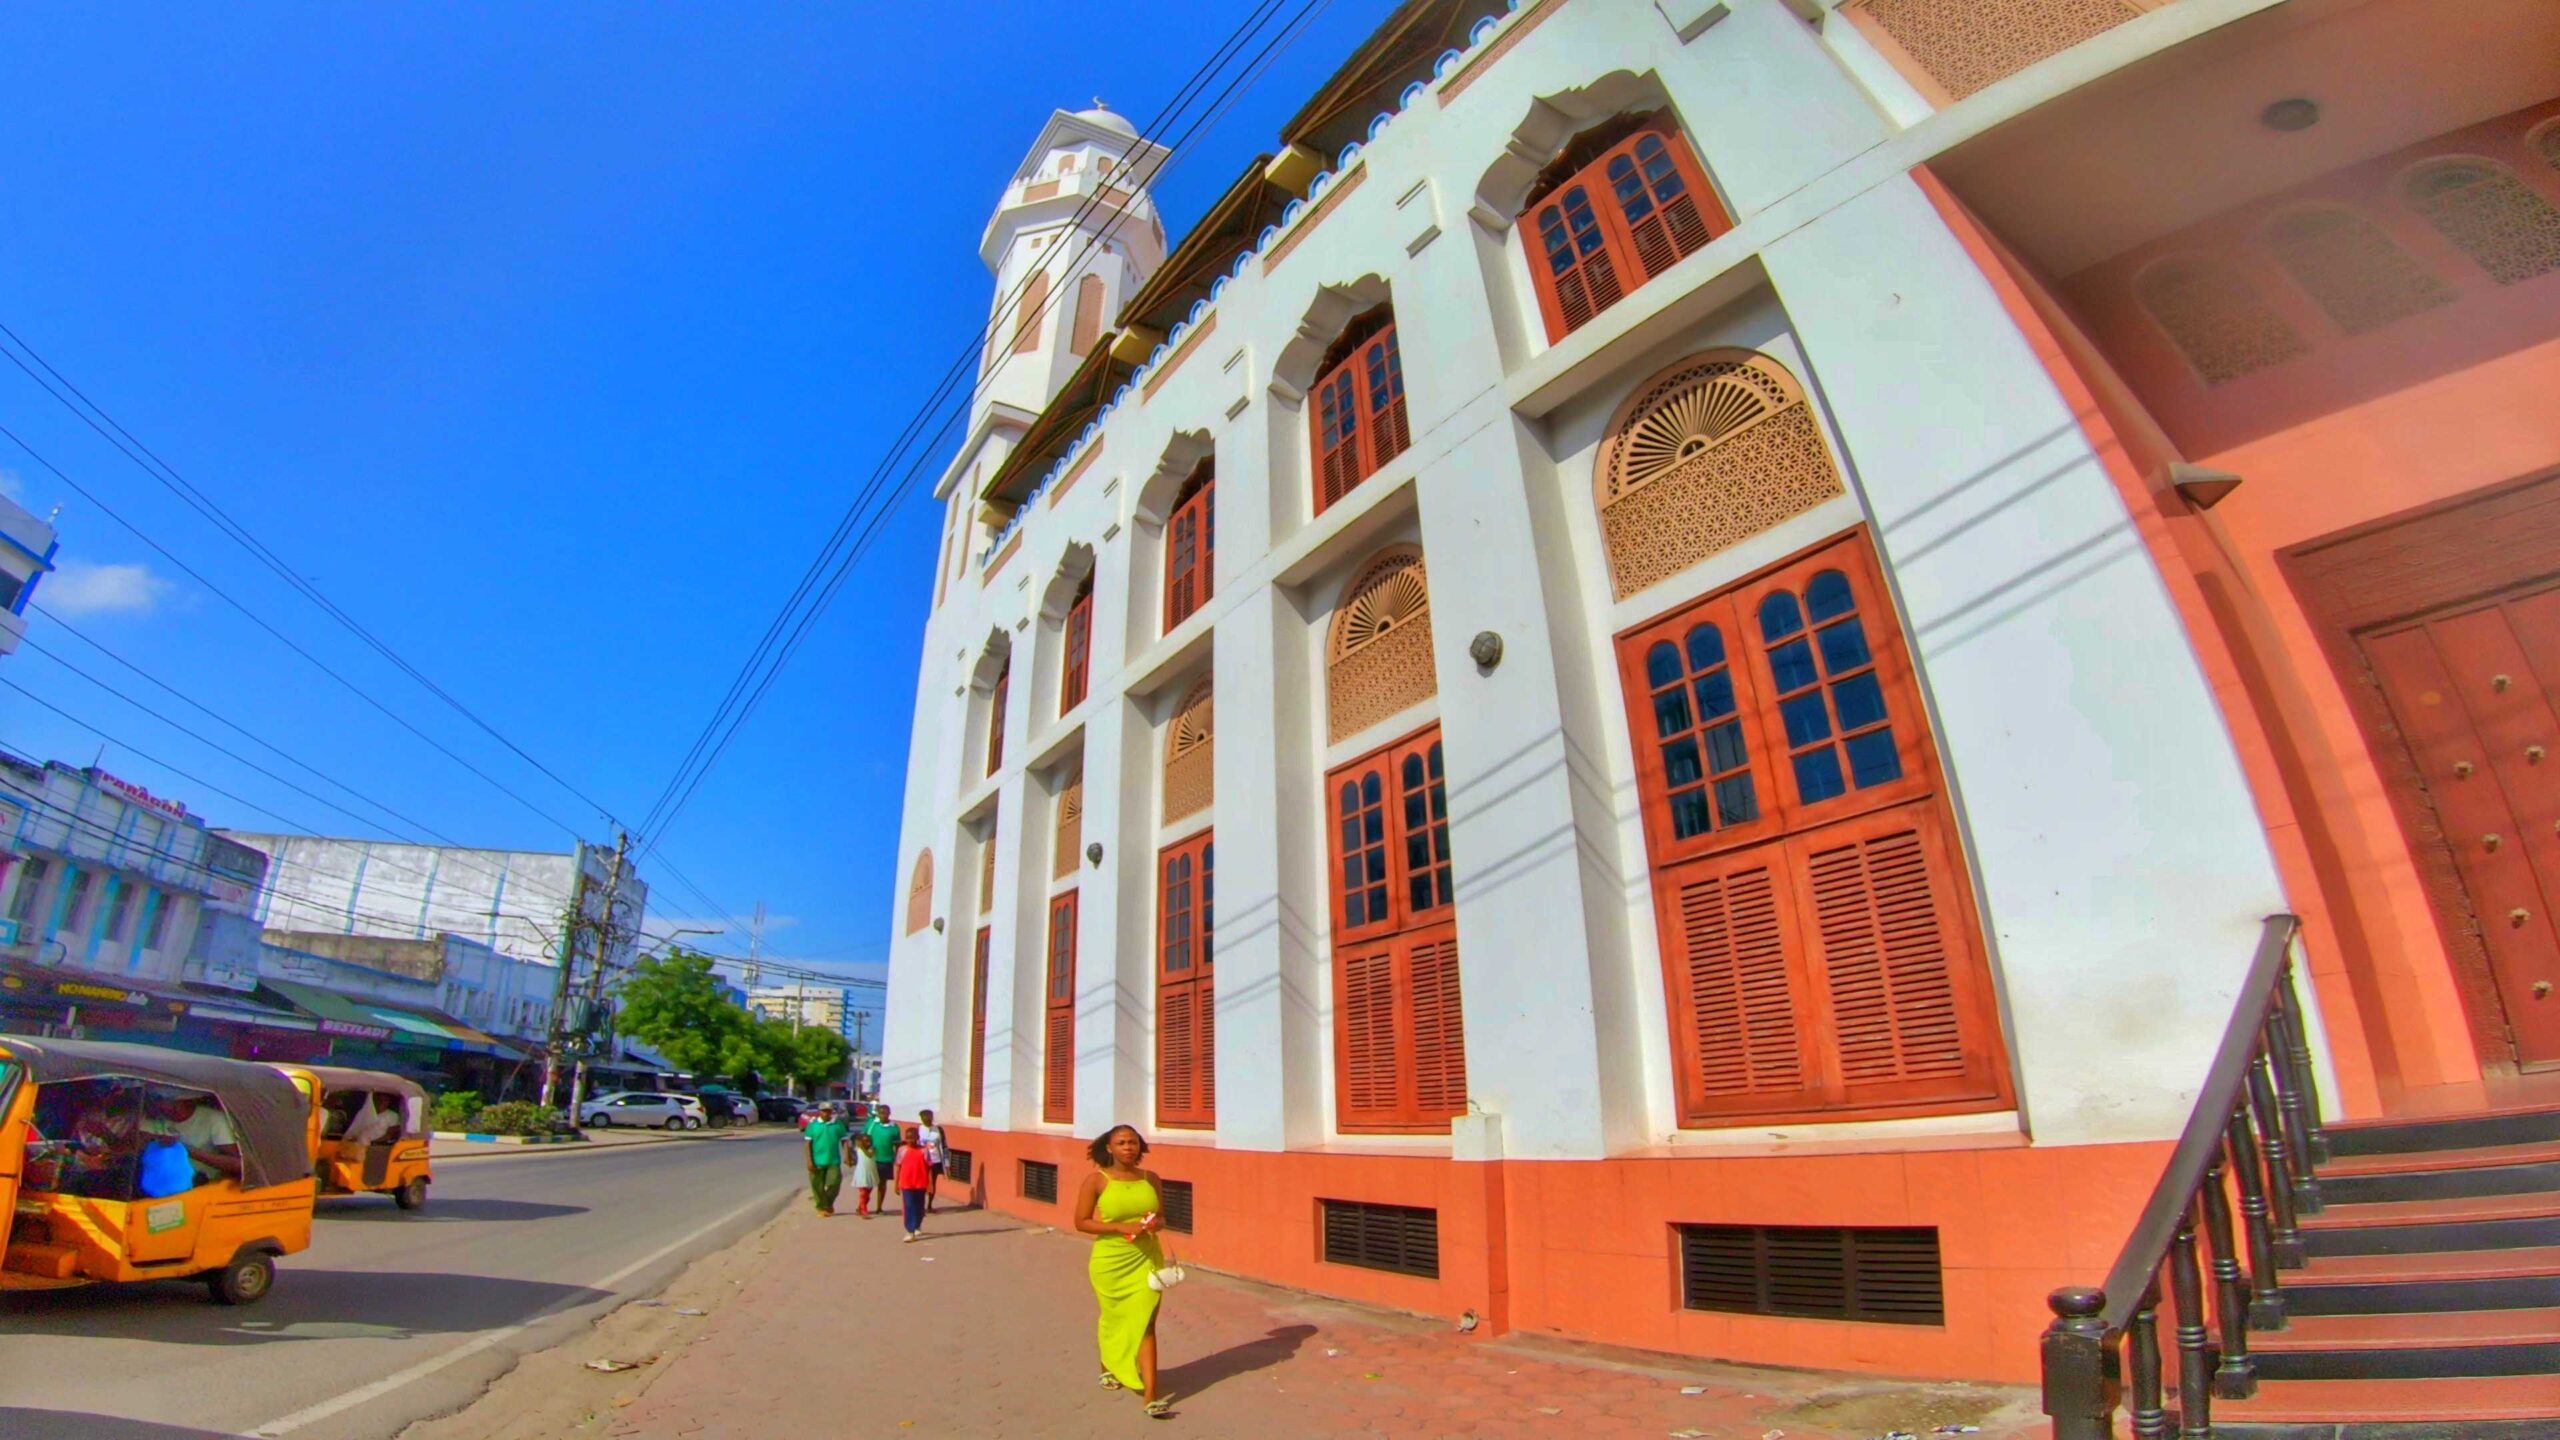 An image showing a mosque in mombasa island